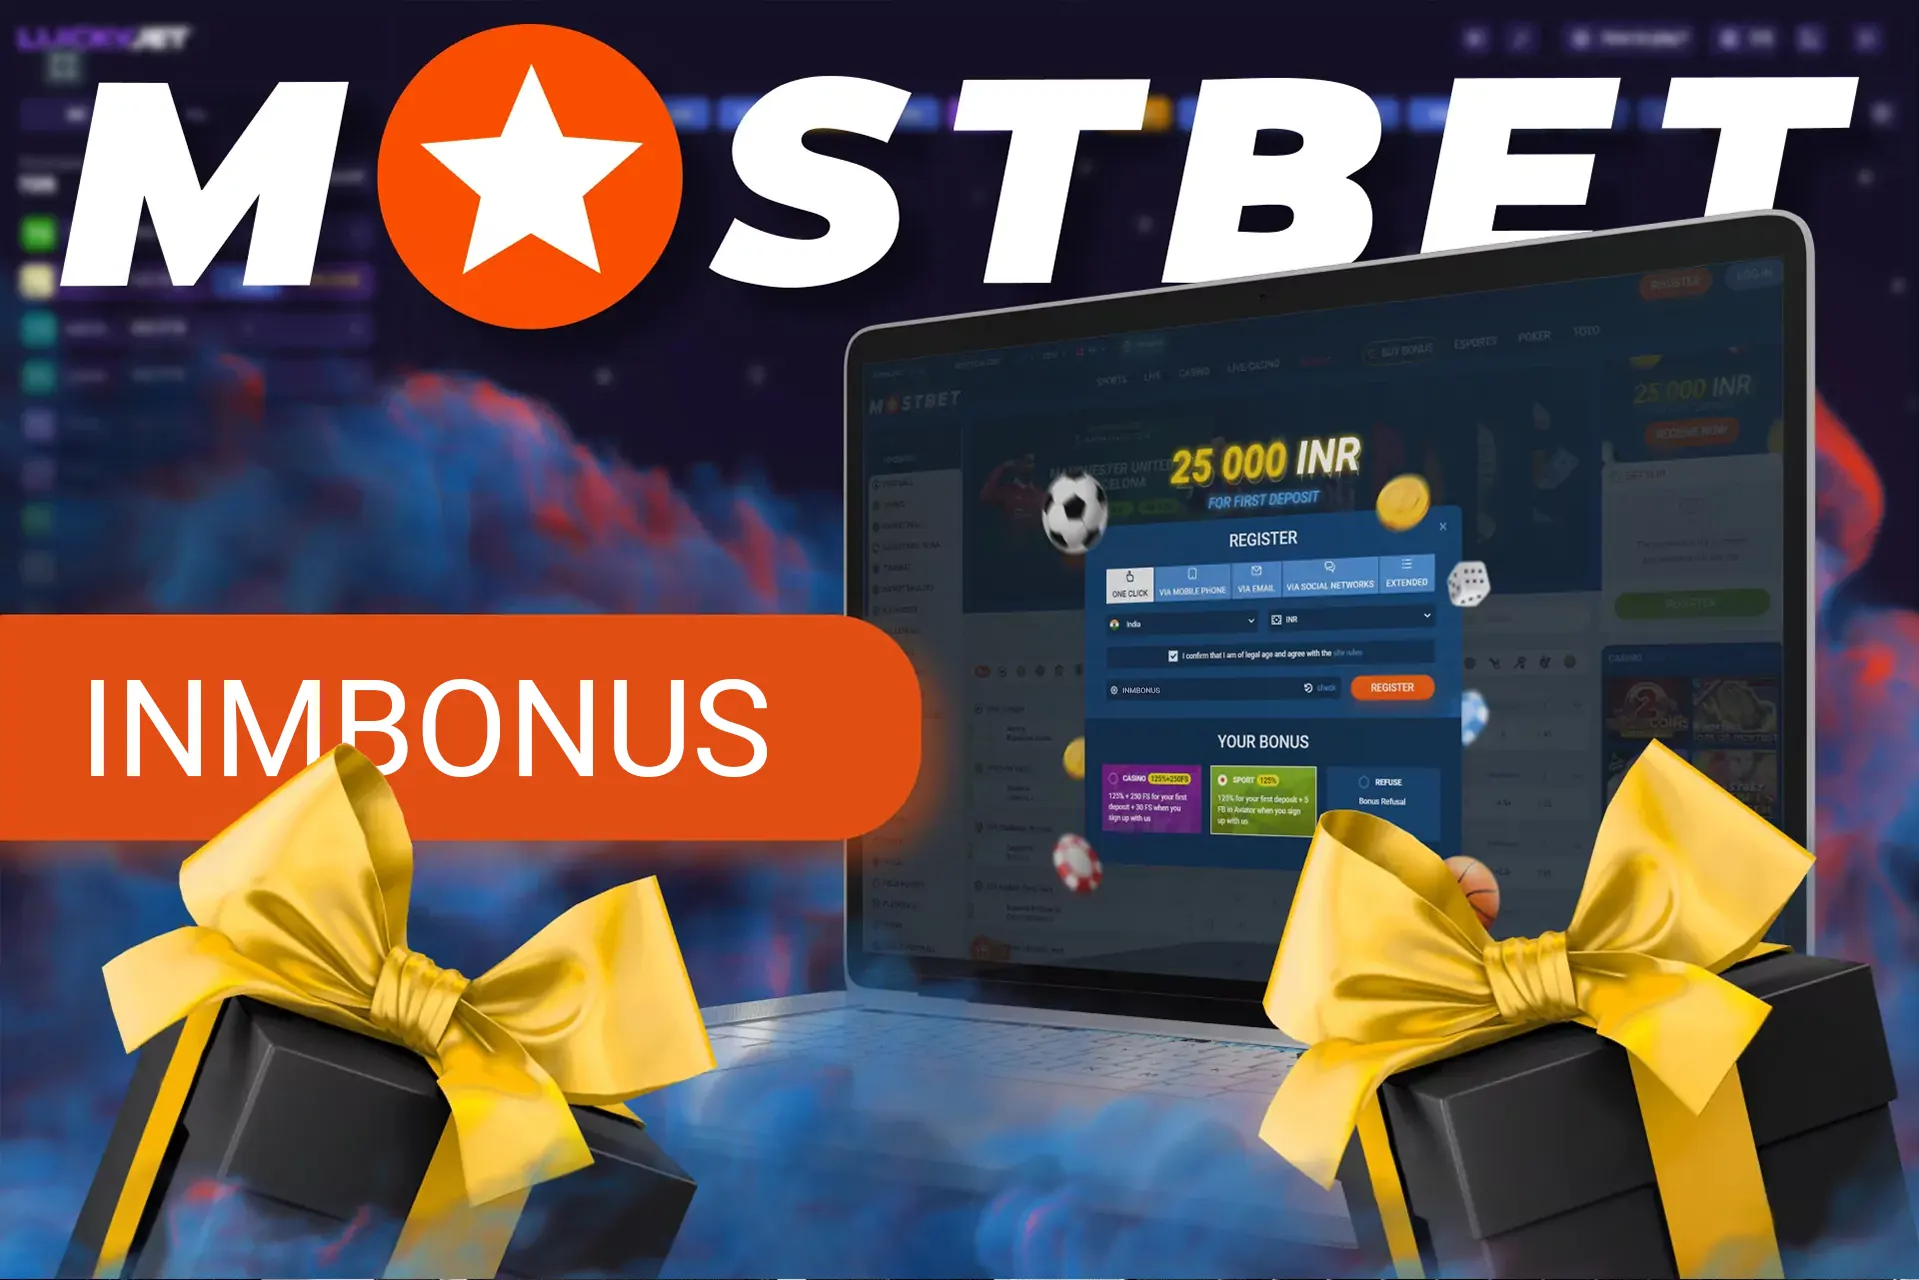 Use a special promo code from Mostbet to get great benefits for games and bets.